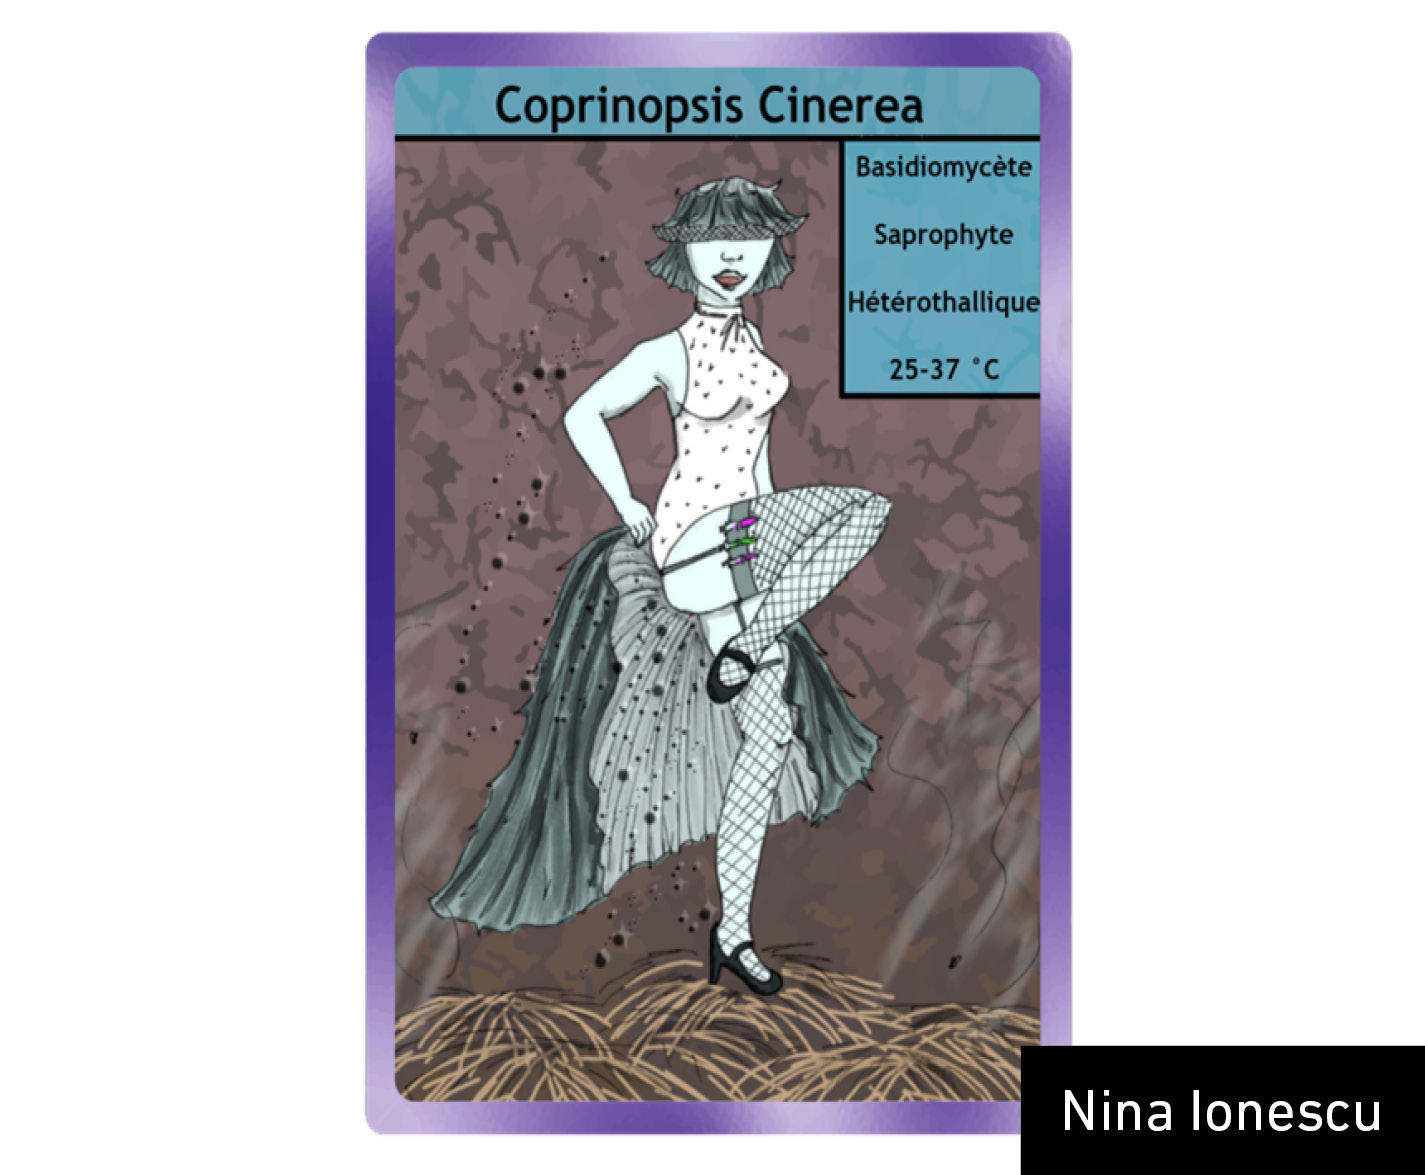 Card representing the fungus Coprinopsis cinerea. The representation brings to mind the role of this fungus as a model Basiodiomycota and highlights key morphological features that are studied in the theoretical class.